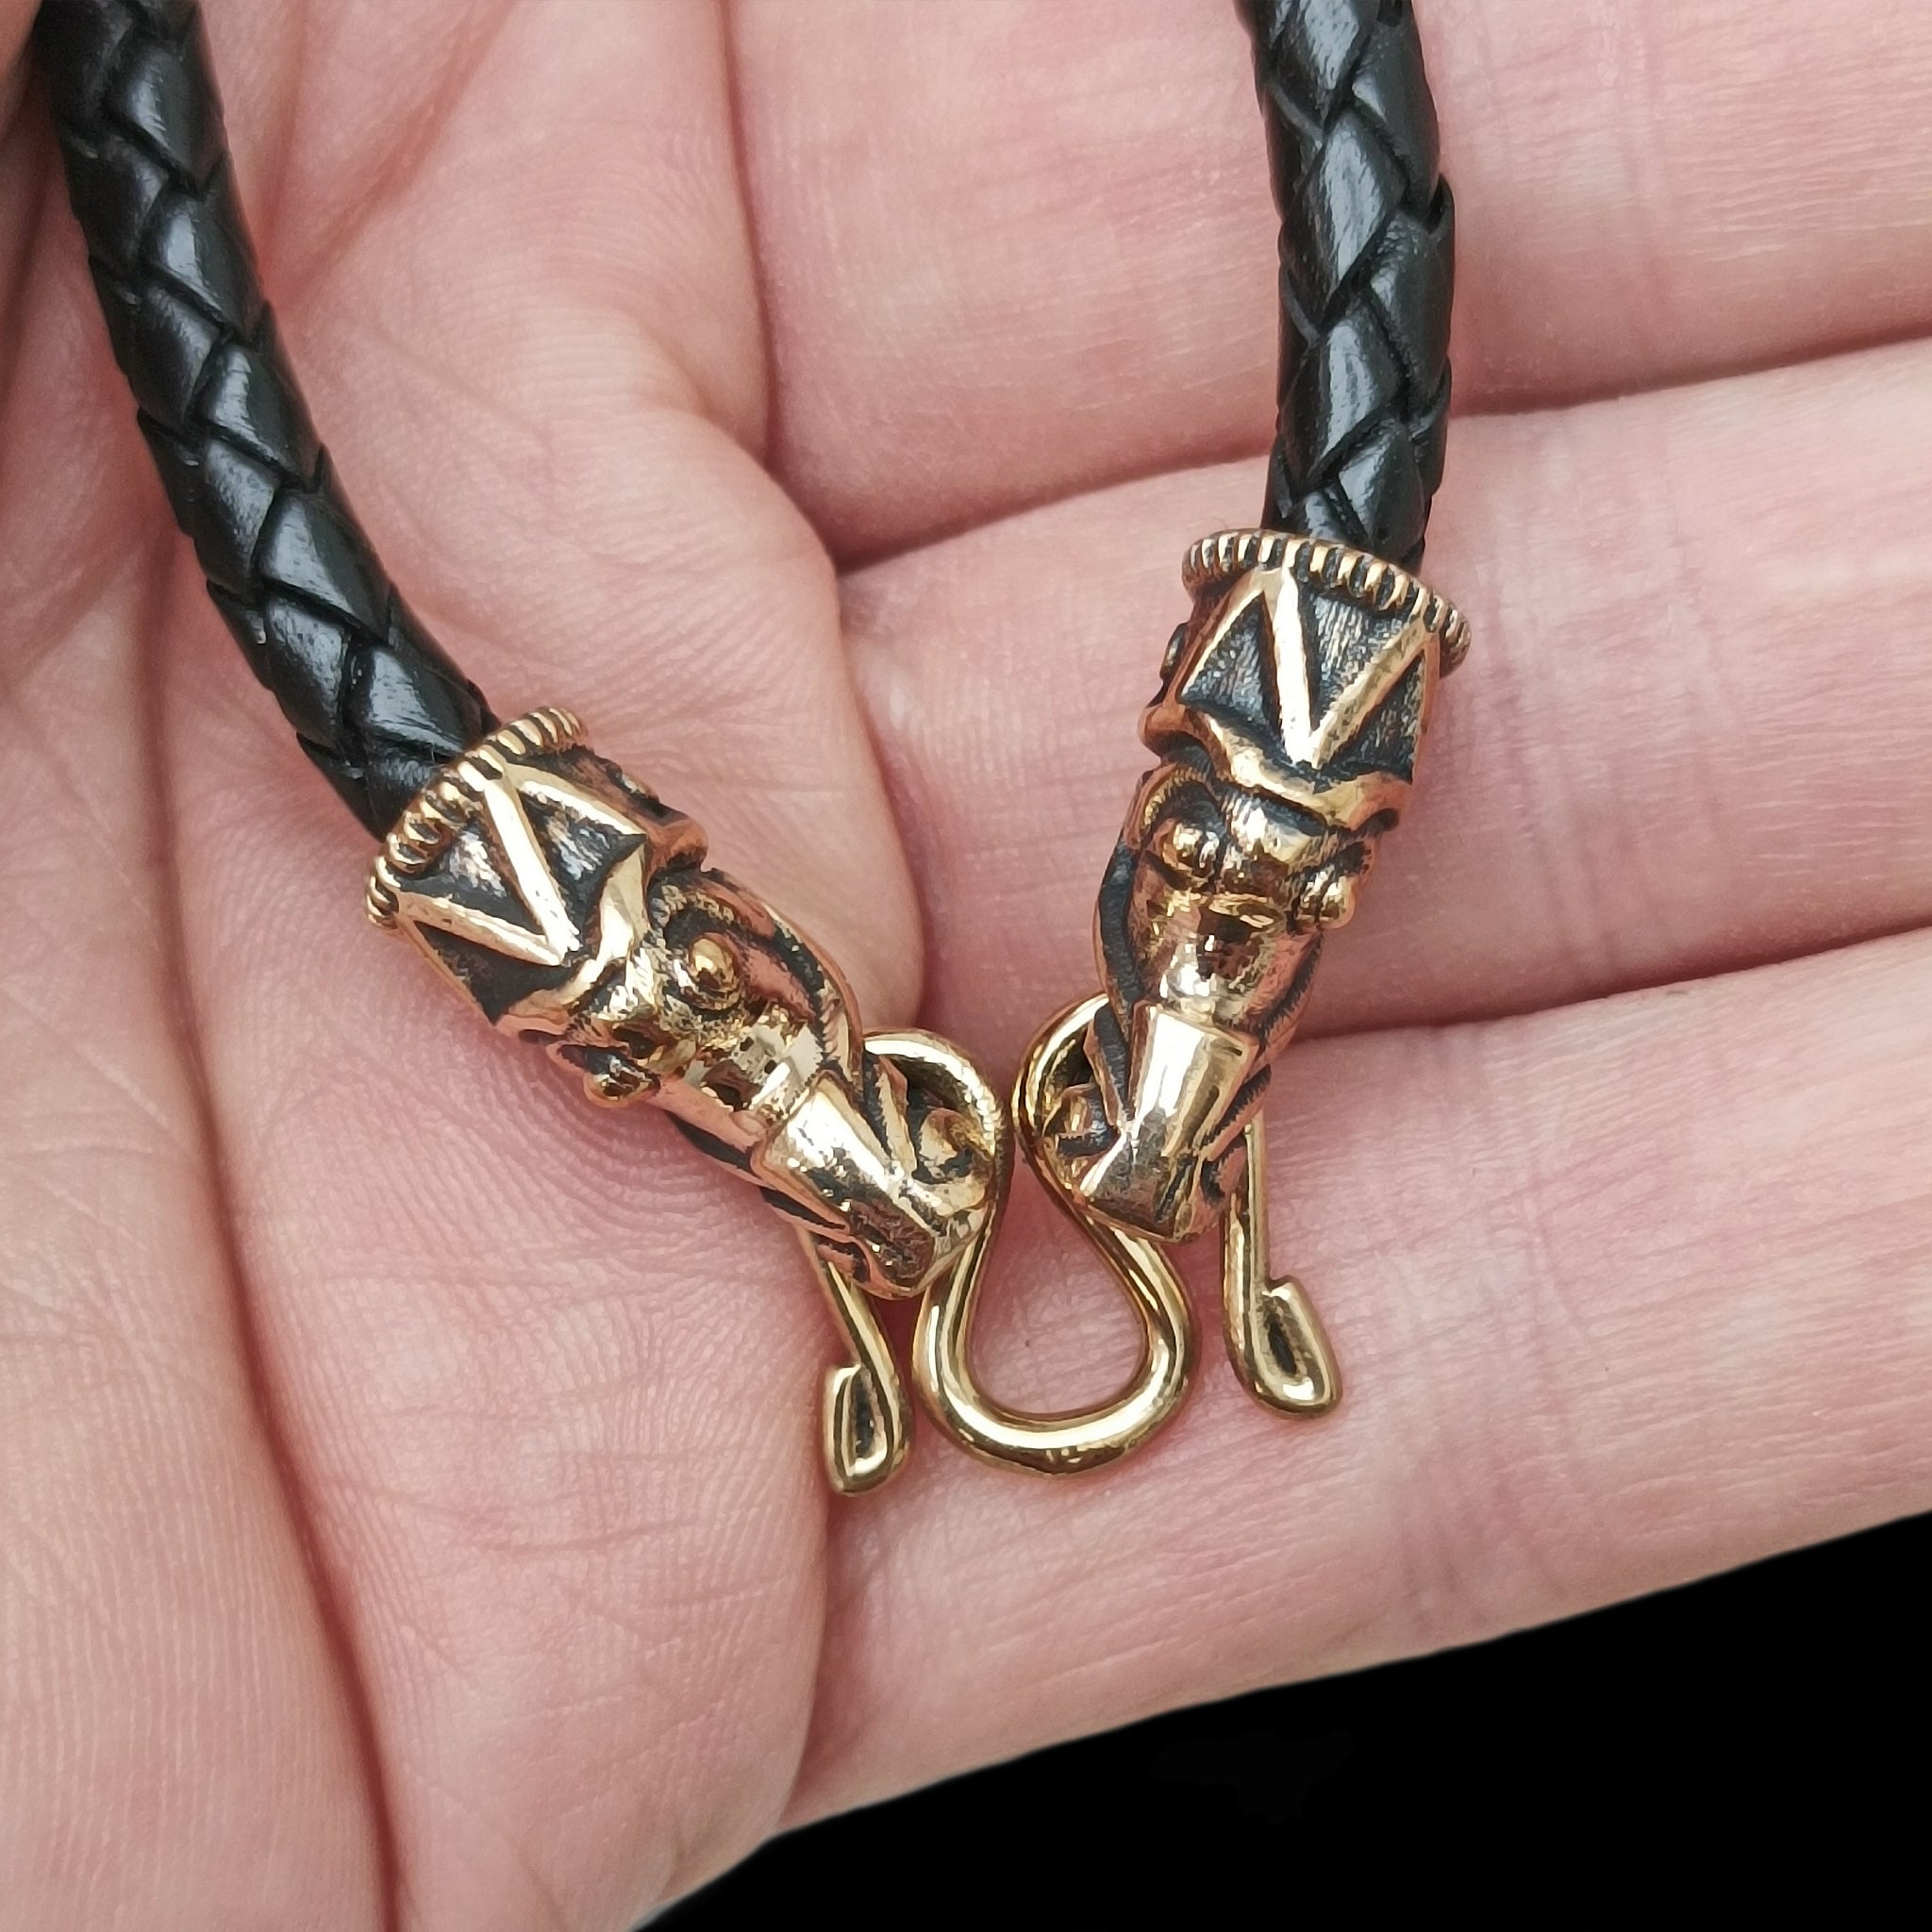 5mm Width Braided Leather Necklace with Bronze Gotlandic Dragon Heads and Butterfly Fitting in Hand